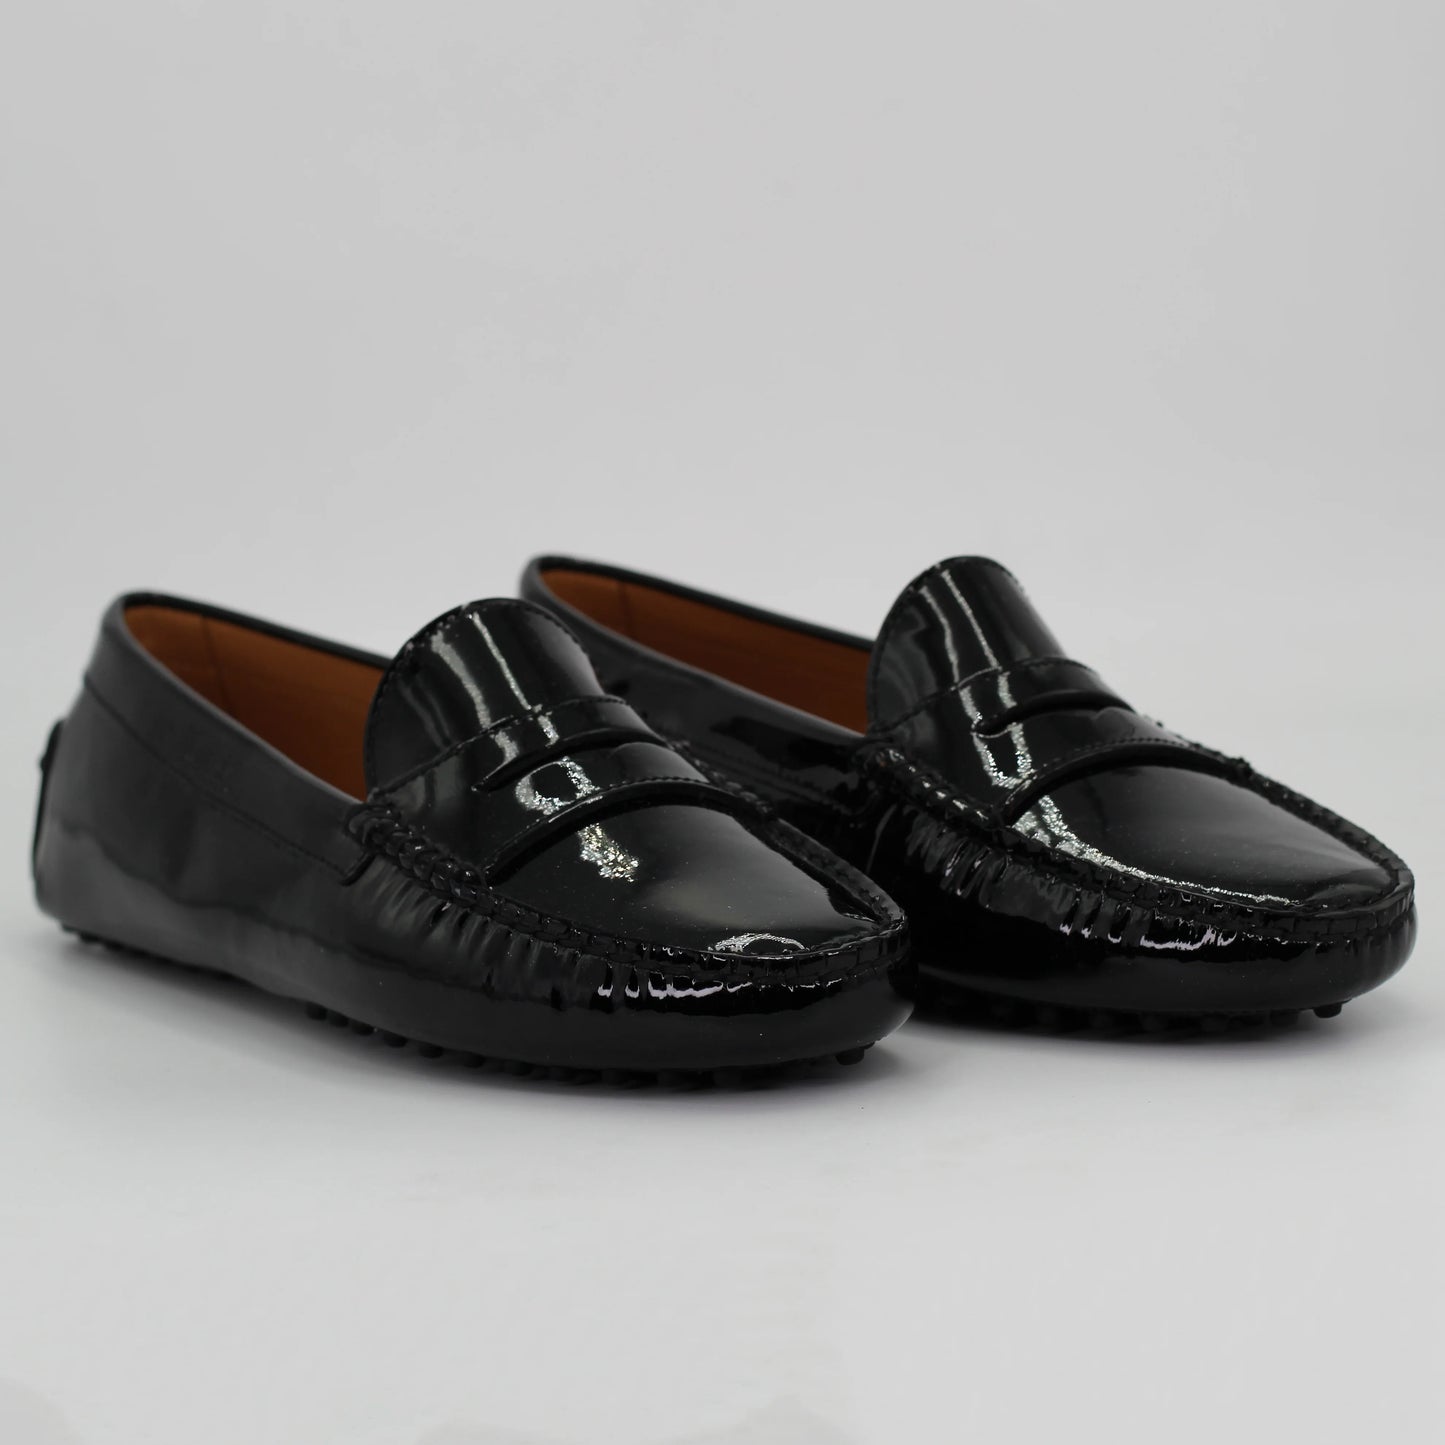 Shop Handmade Italian Leather moccasin in black (COND0402) or browse our range of hand-made Italian shoes in leather or suede in-store at Aliverti Cape Town, or shop online. We deliver in South Africa & offer multiple payment plans as well as accept multiple safe & secure payment methods.